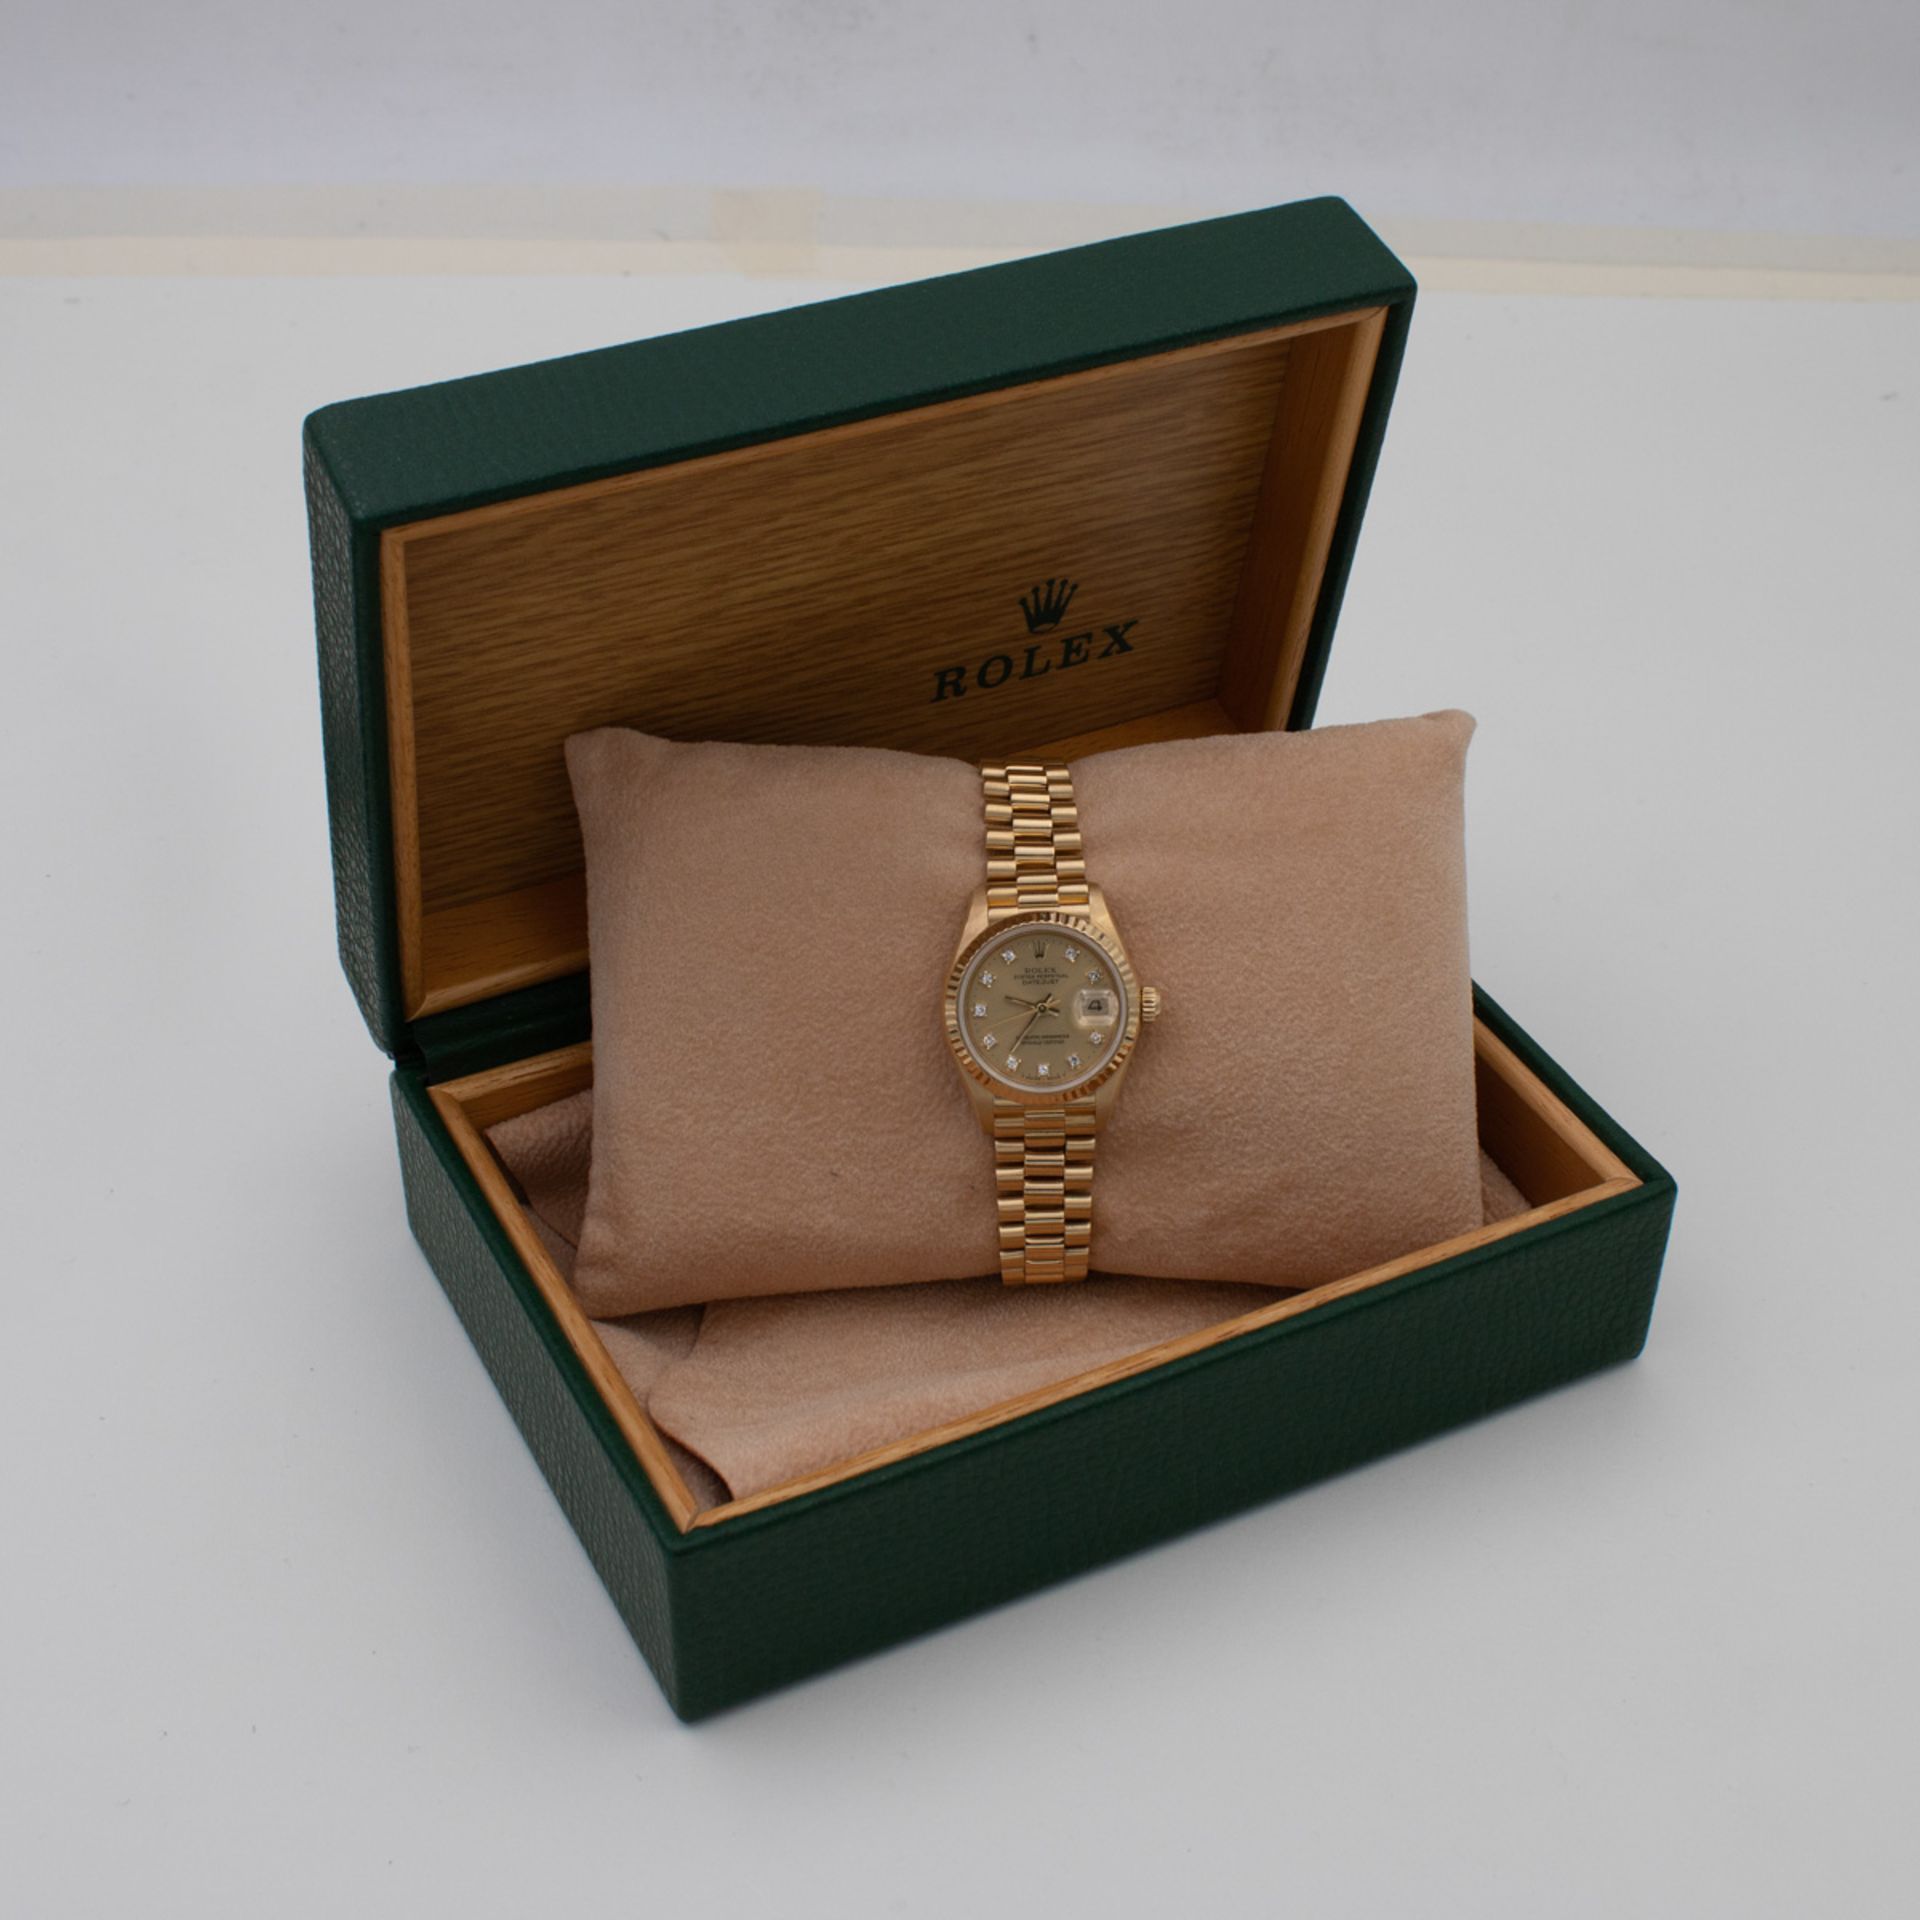 Rolex Oyster Perpetual Datejust ladies watch - Image 4 of 4